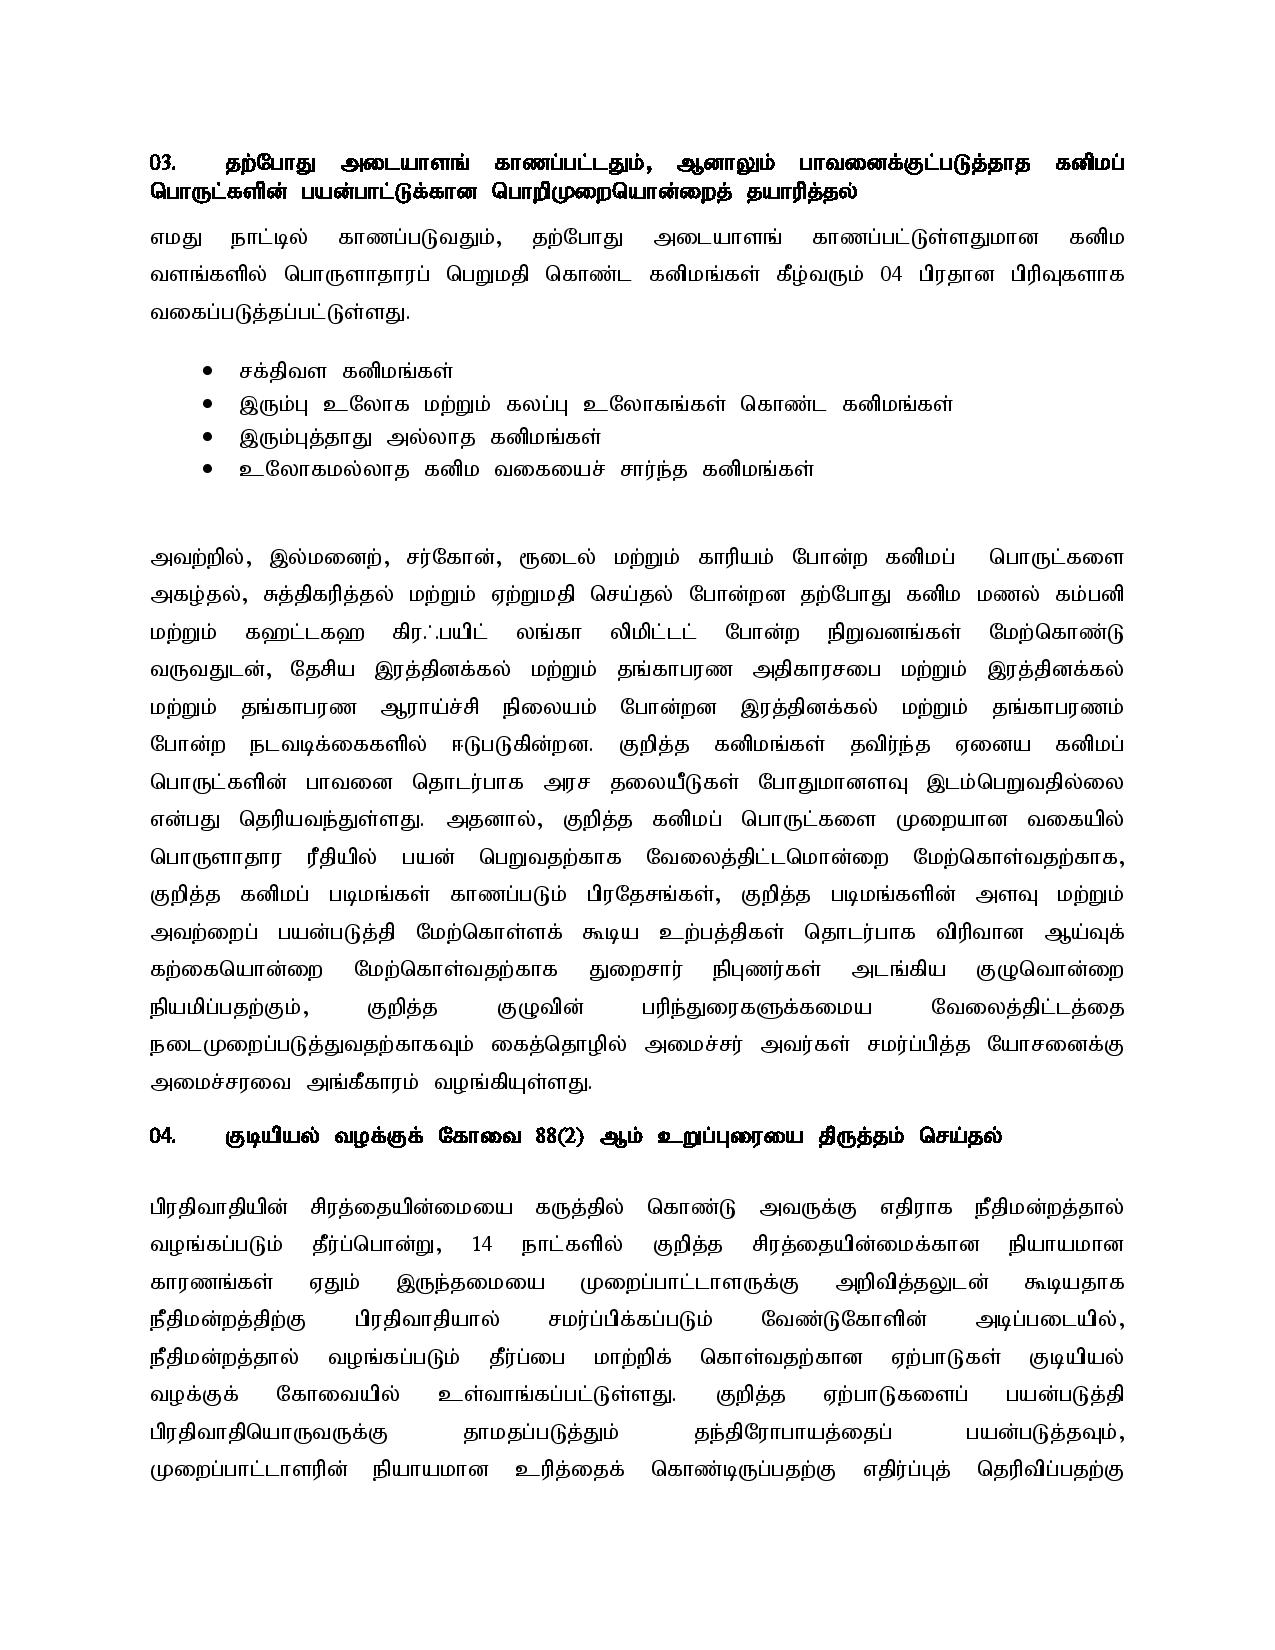 Cabinet Decision on 2021.09.13 Tamil page 002